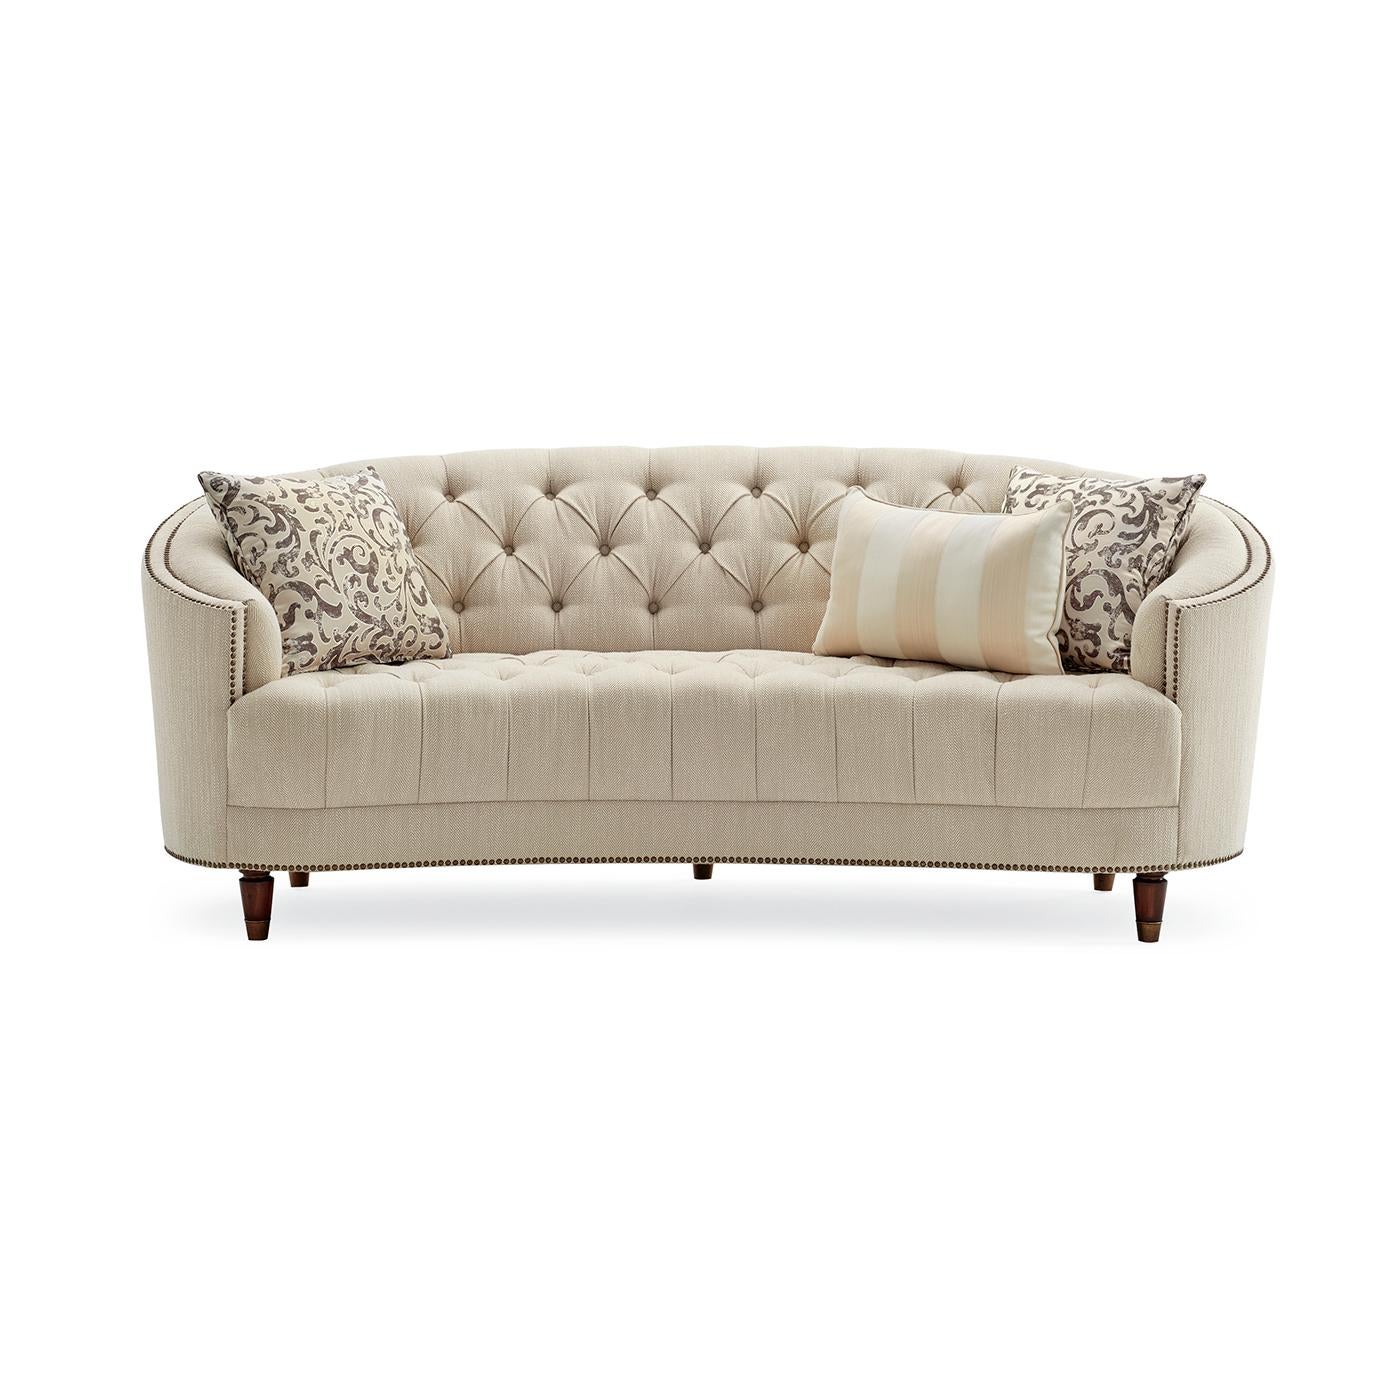 Classic tufted curved back bench seat sofa. Curvaceous and shapely, with traditional elements like button-tufting and decorative nailhead trim, this bench seat sofa also conveys a modern sensibility covered in a subtly textured herringbone fabric,